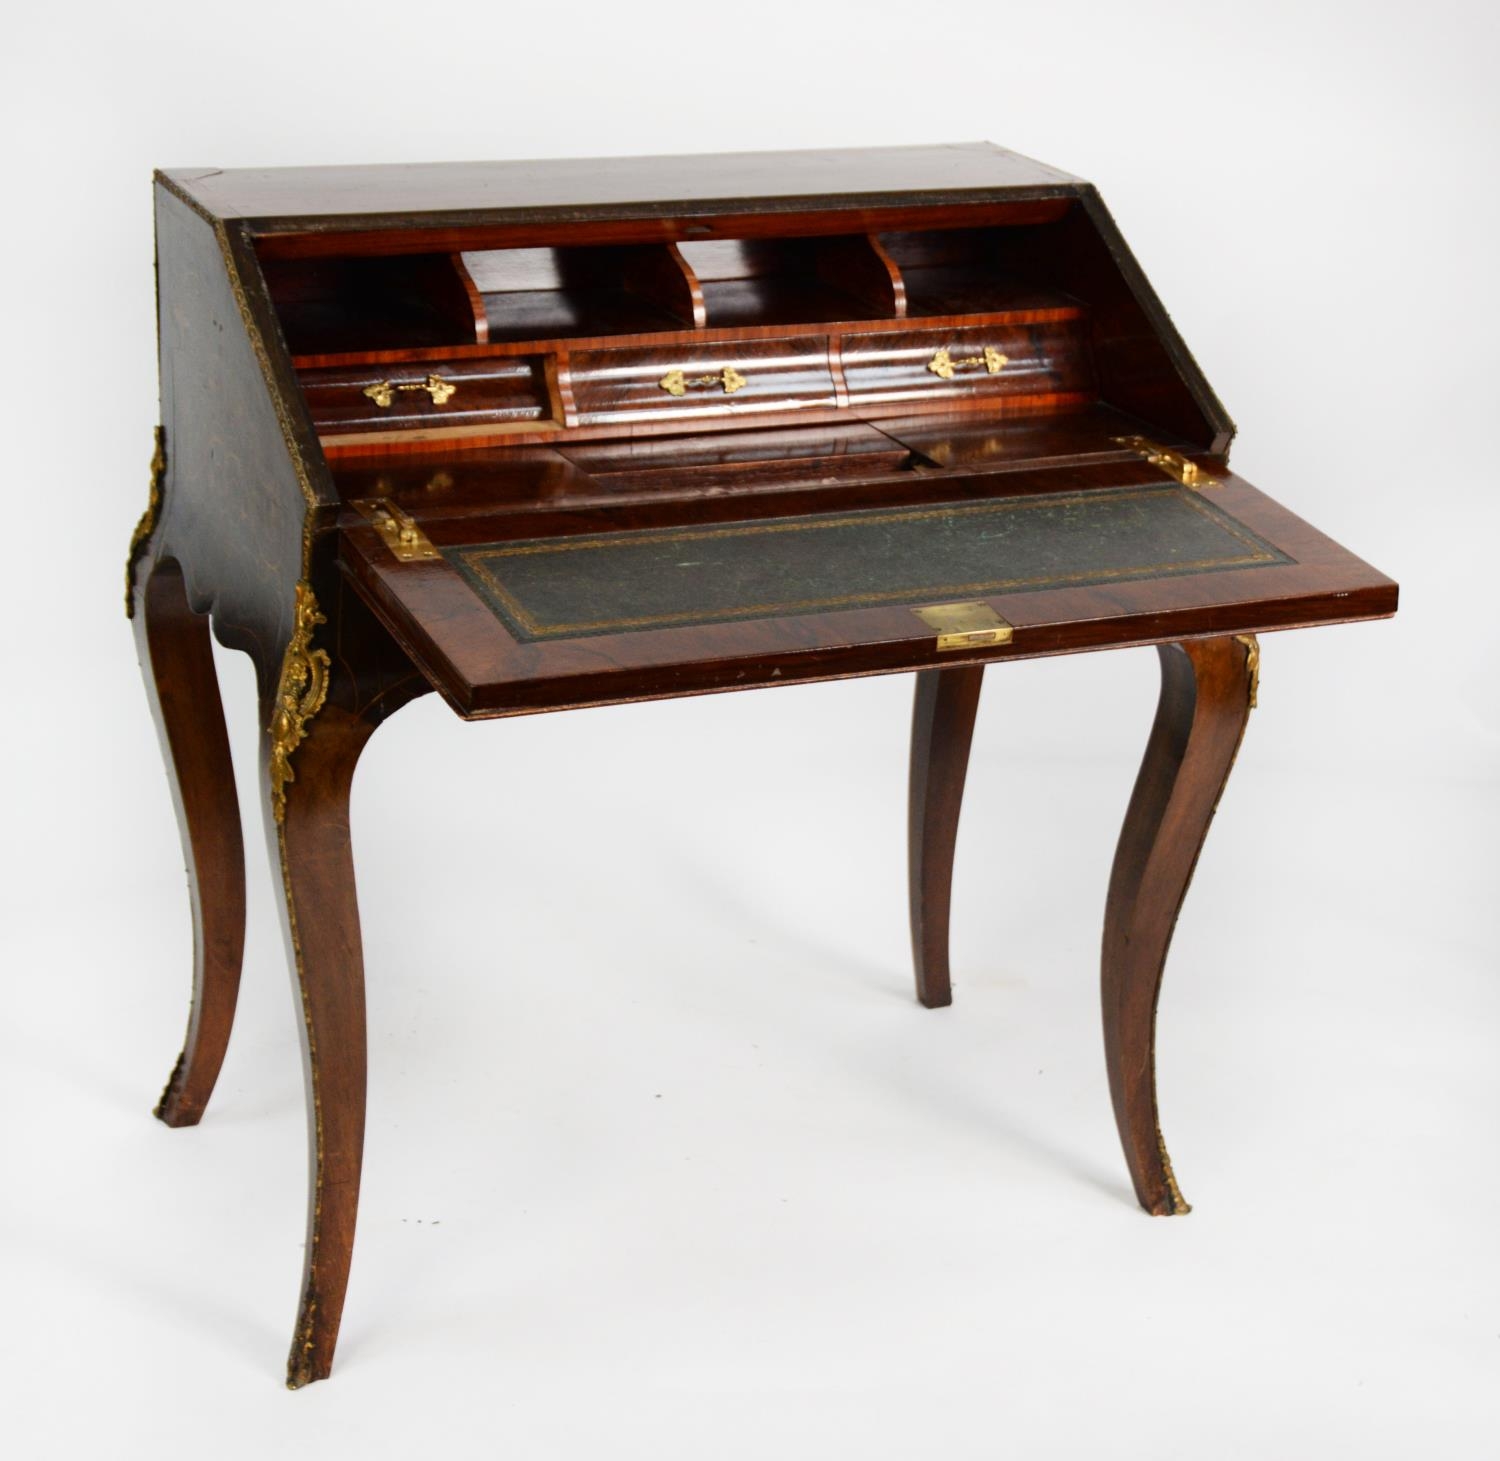 LATE NINETEENTH CENTURY GILT METAL MOUNTED AND INLAID KINGWOOD BUREAU DE DAME, of typical for the - Image 2 of 6